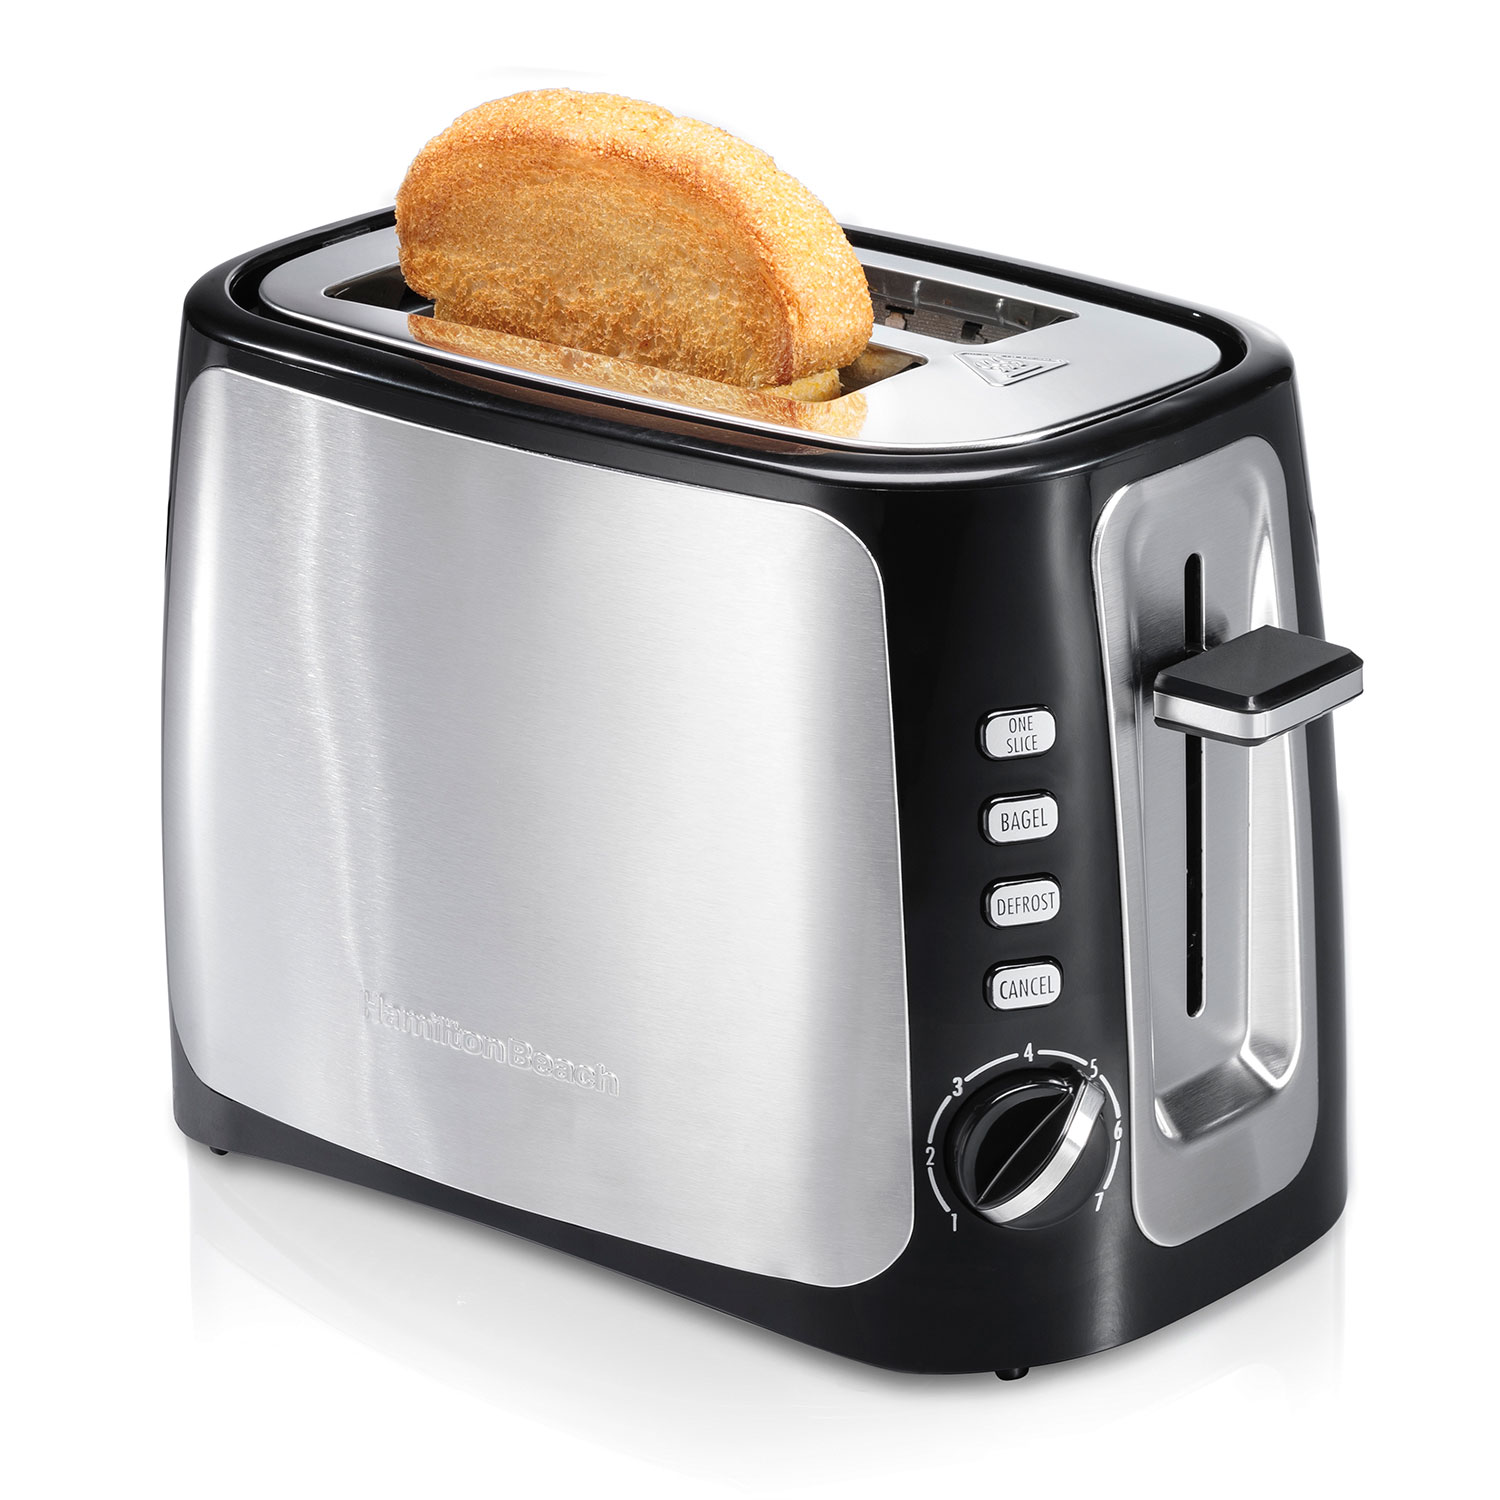 Sure-Toast 2 Slice Toaster with Toast Boost Black and Stainless Steel, (22820)